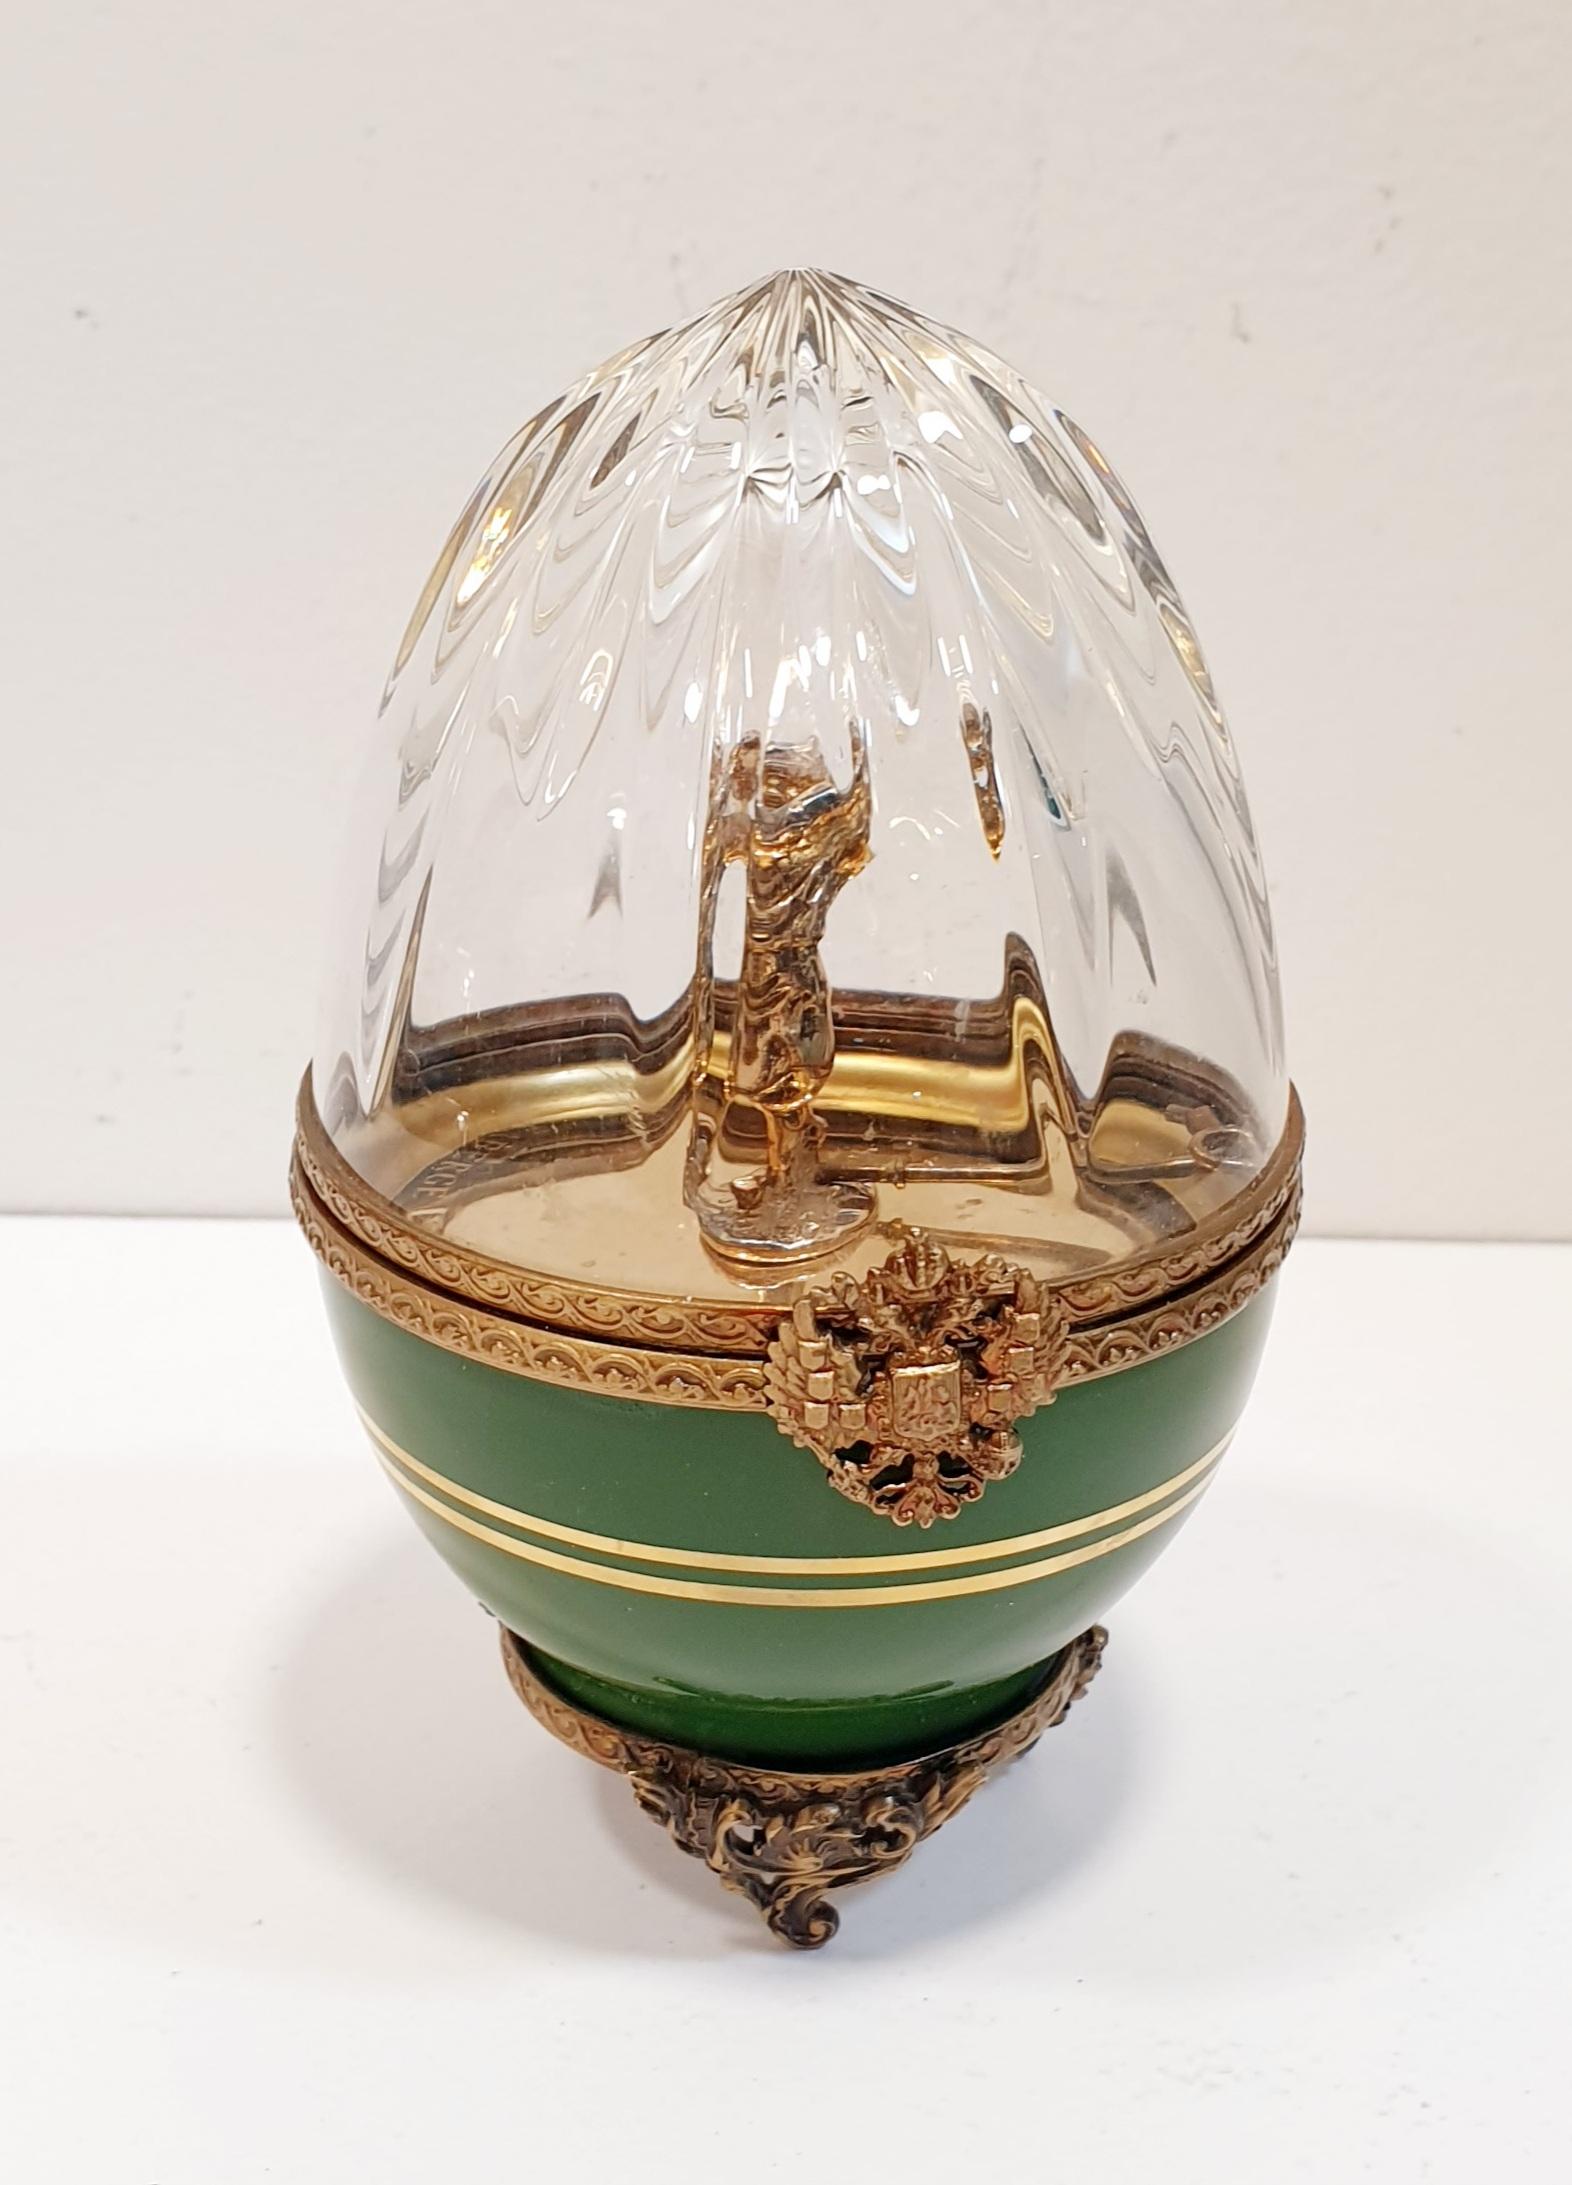 The Fabergé egg is the symbol of spiritual and physical rebirth and renewal. 
This crystal egg is signed and numbered 281
Fabergé eggs are handcrafted in St. Petersburg. Russia.
As descendants of the original Fabergé artists, they recreated the eggs